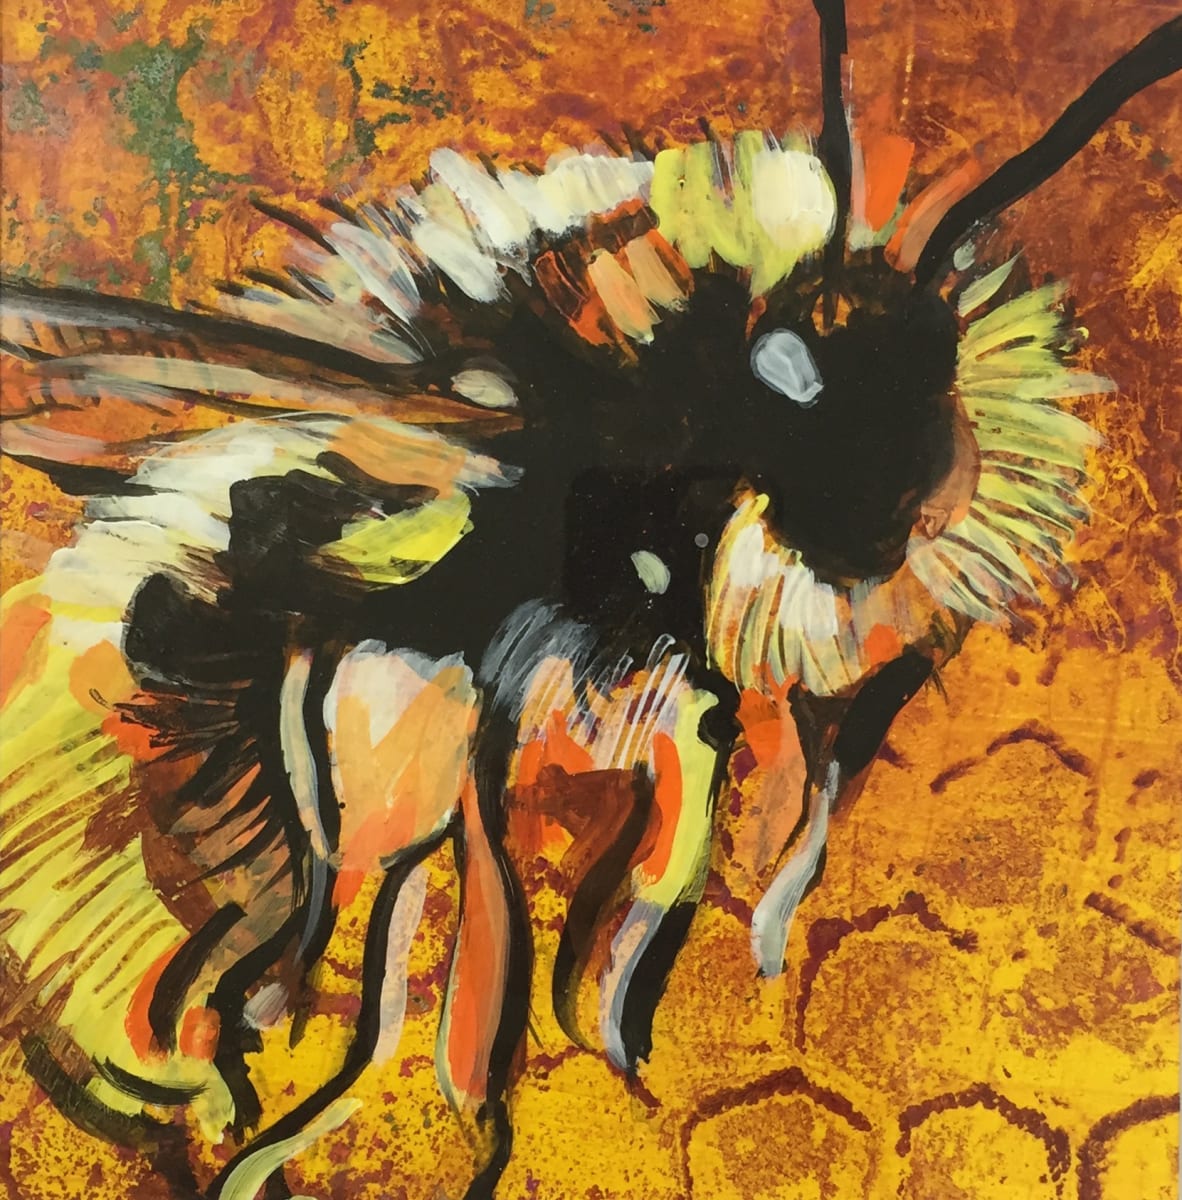 Bumble Bee  Image: Bumble Bee painted on a gelatin print background